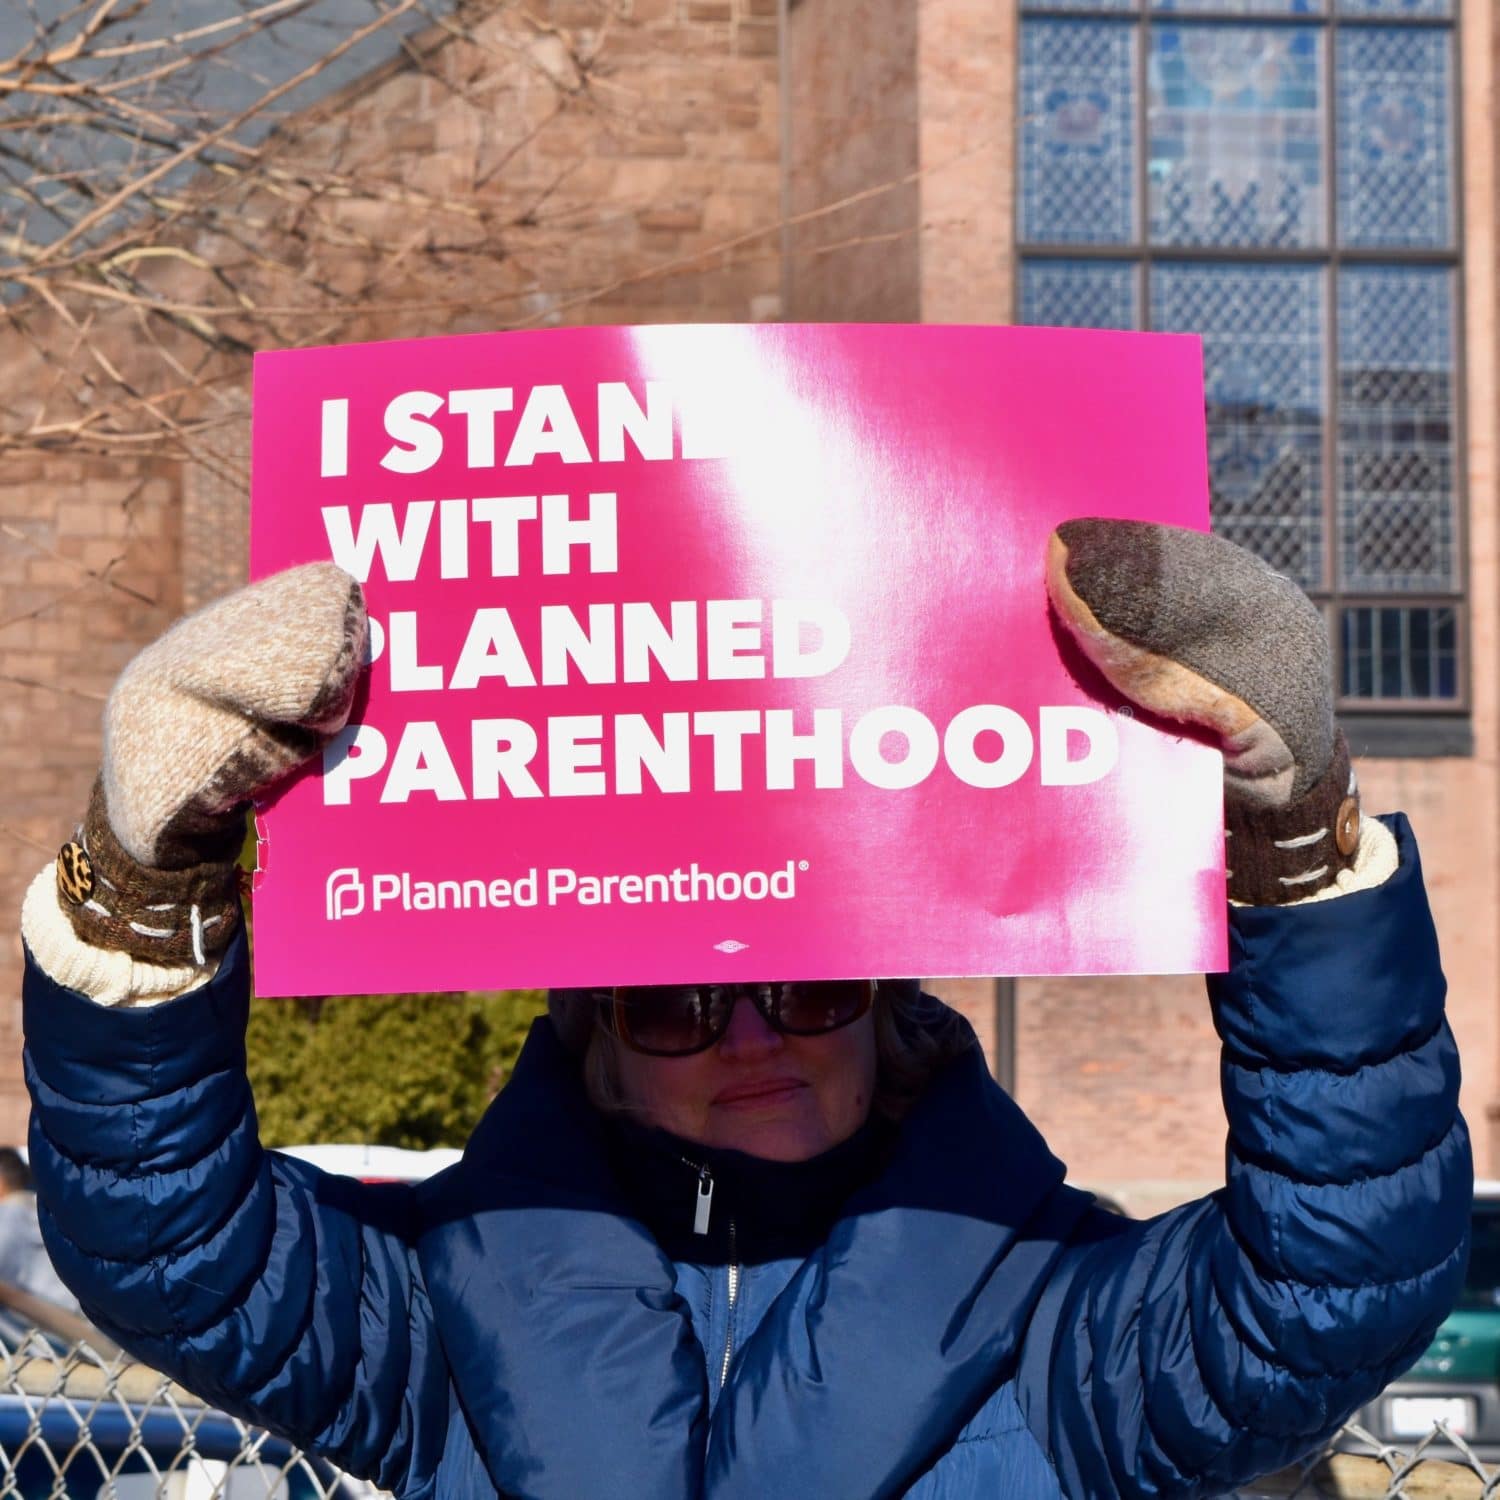 Rhode Island News: Planned Parenthood Votes! RI PAC: Primary races provide victories for reproductive freedom